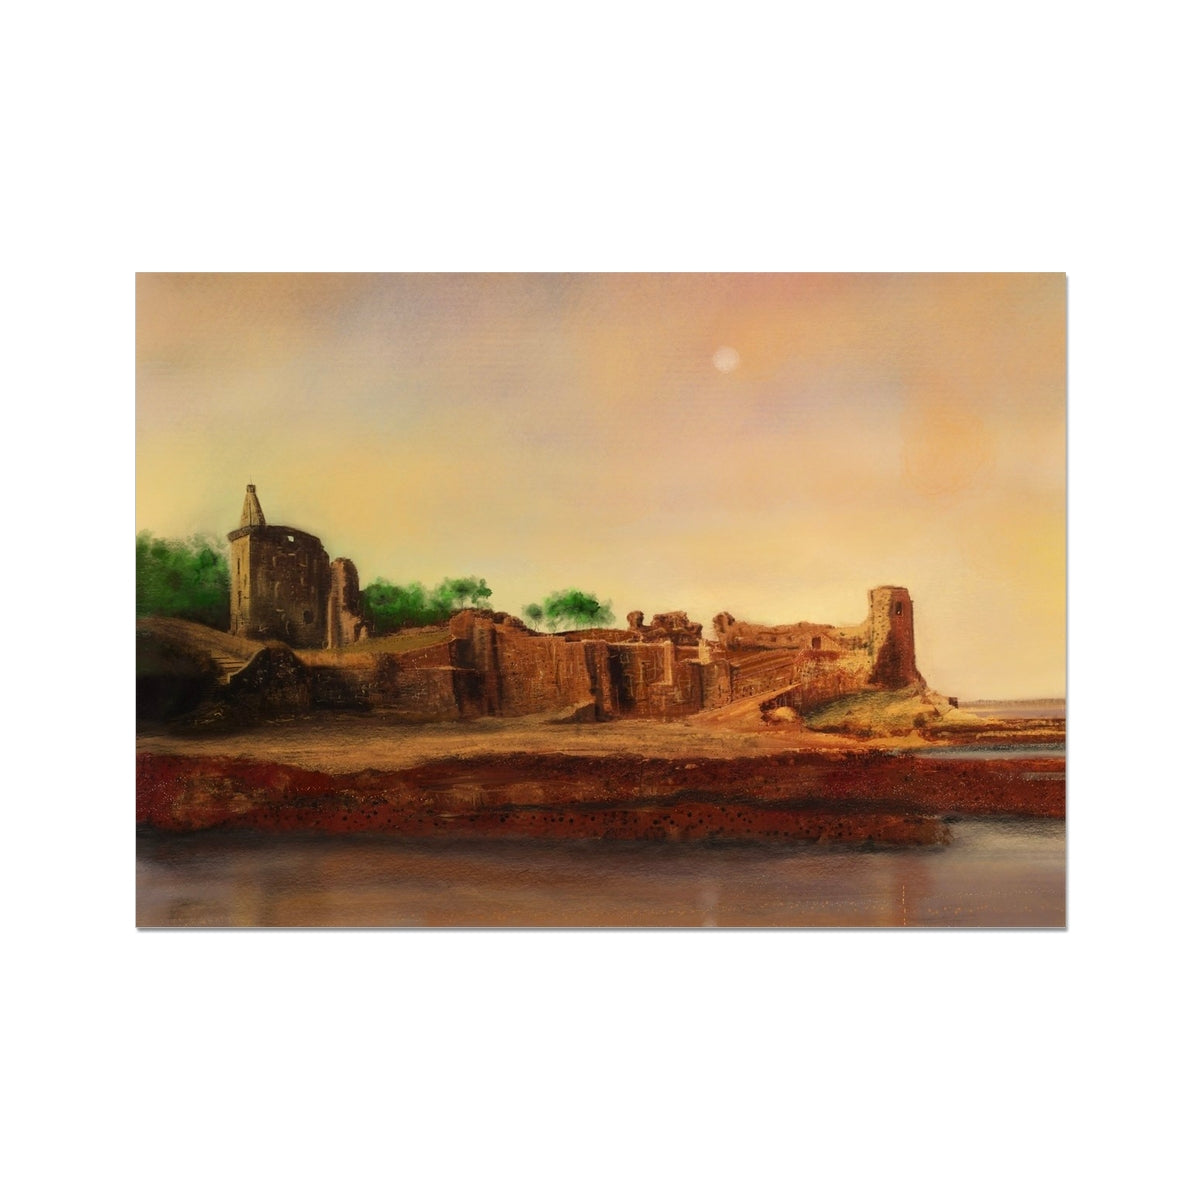 St Andrews Castle Painting | Fine Art Prints From Scotland-Unframed Prints-Historic & Iconic Scotland Art Gallery-A2 Landscape-Paintings, Prints, Homeware, Art Gifts From Scotland By Scottish Artist Kevin Hunter